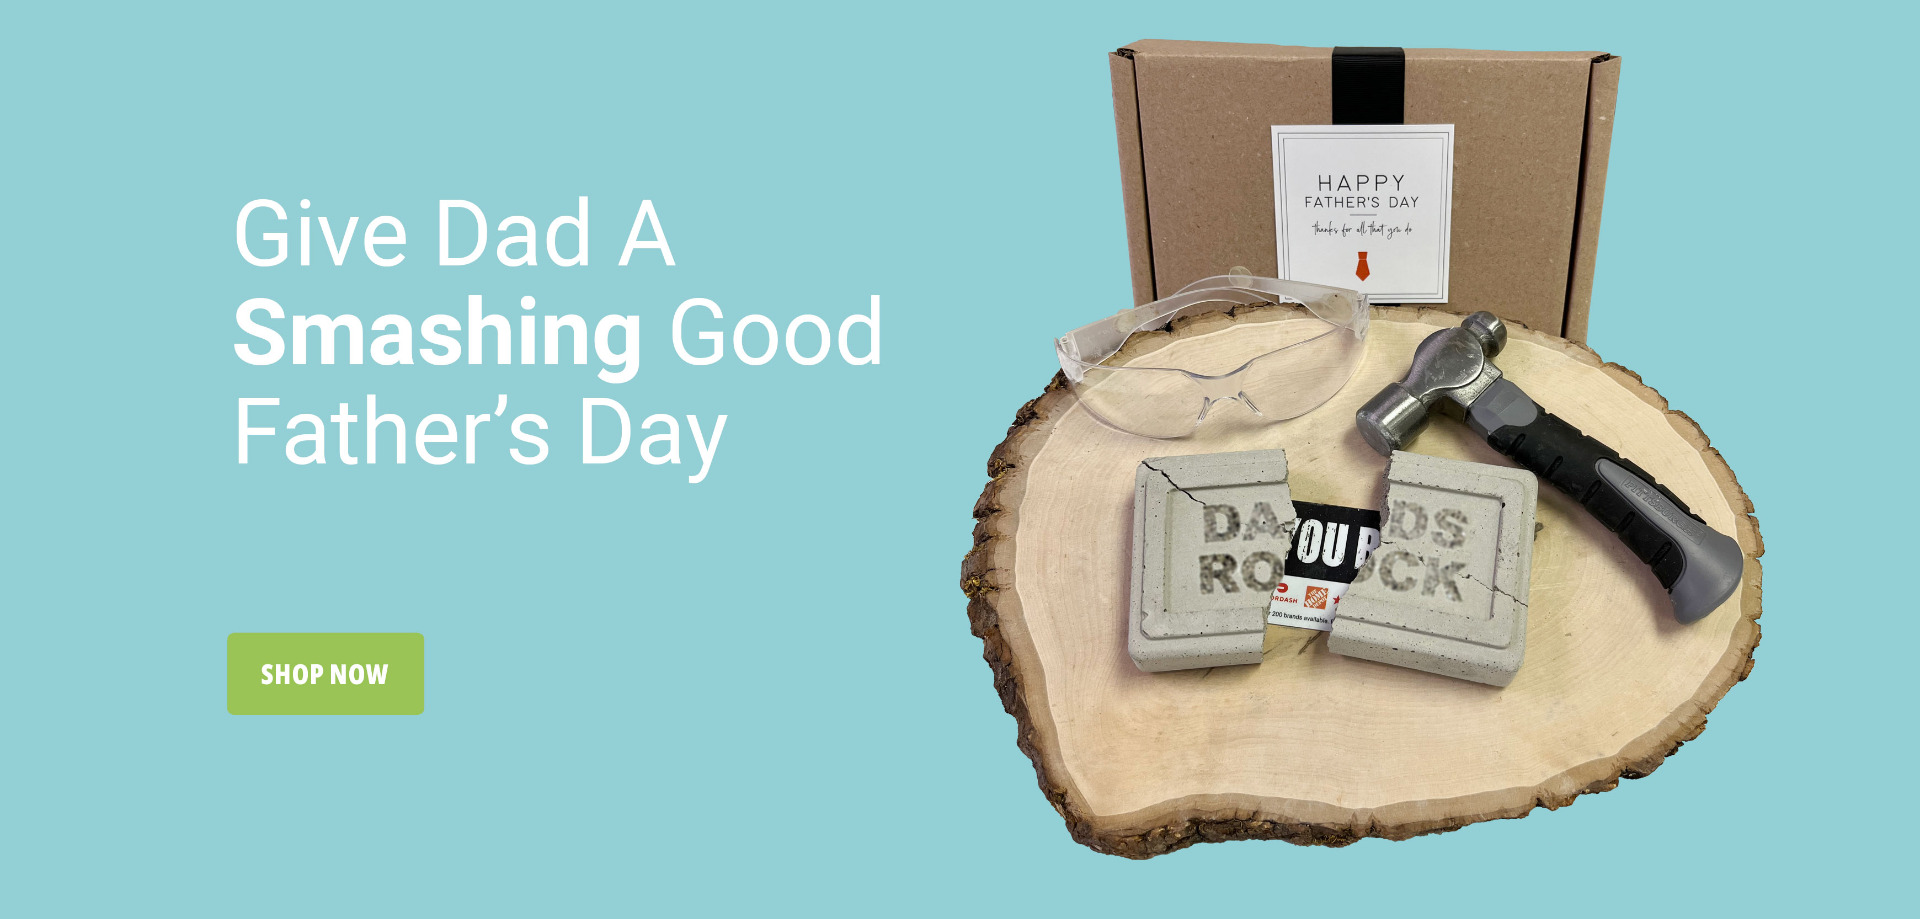 Give your dad a smashing good Father's Day